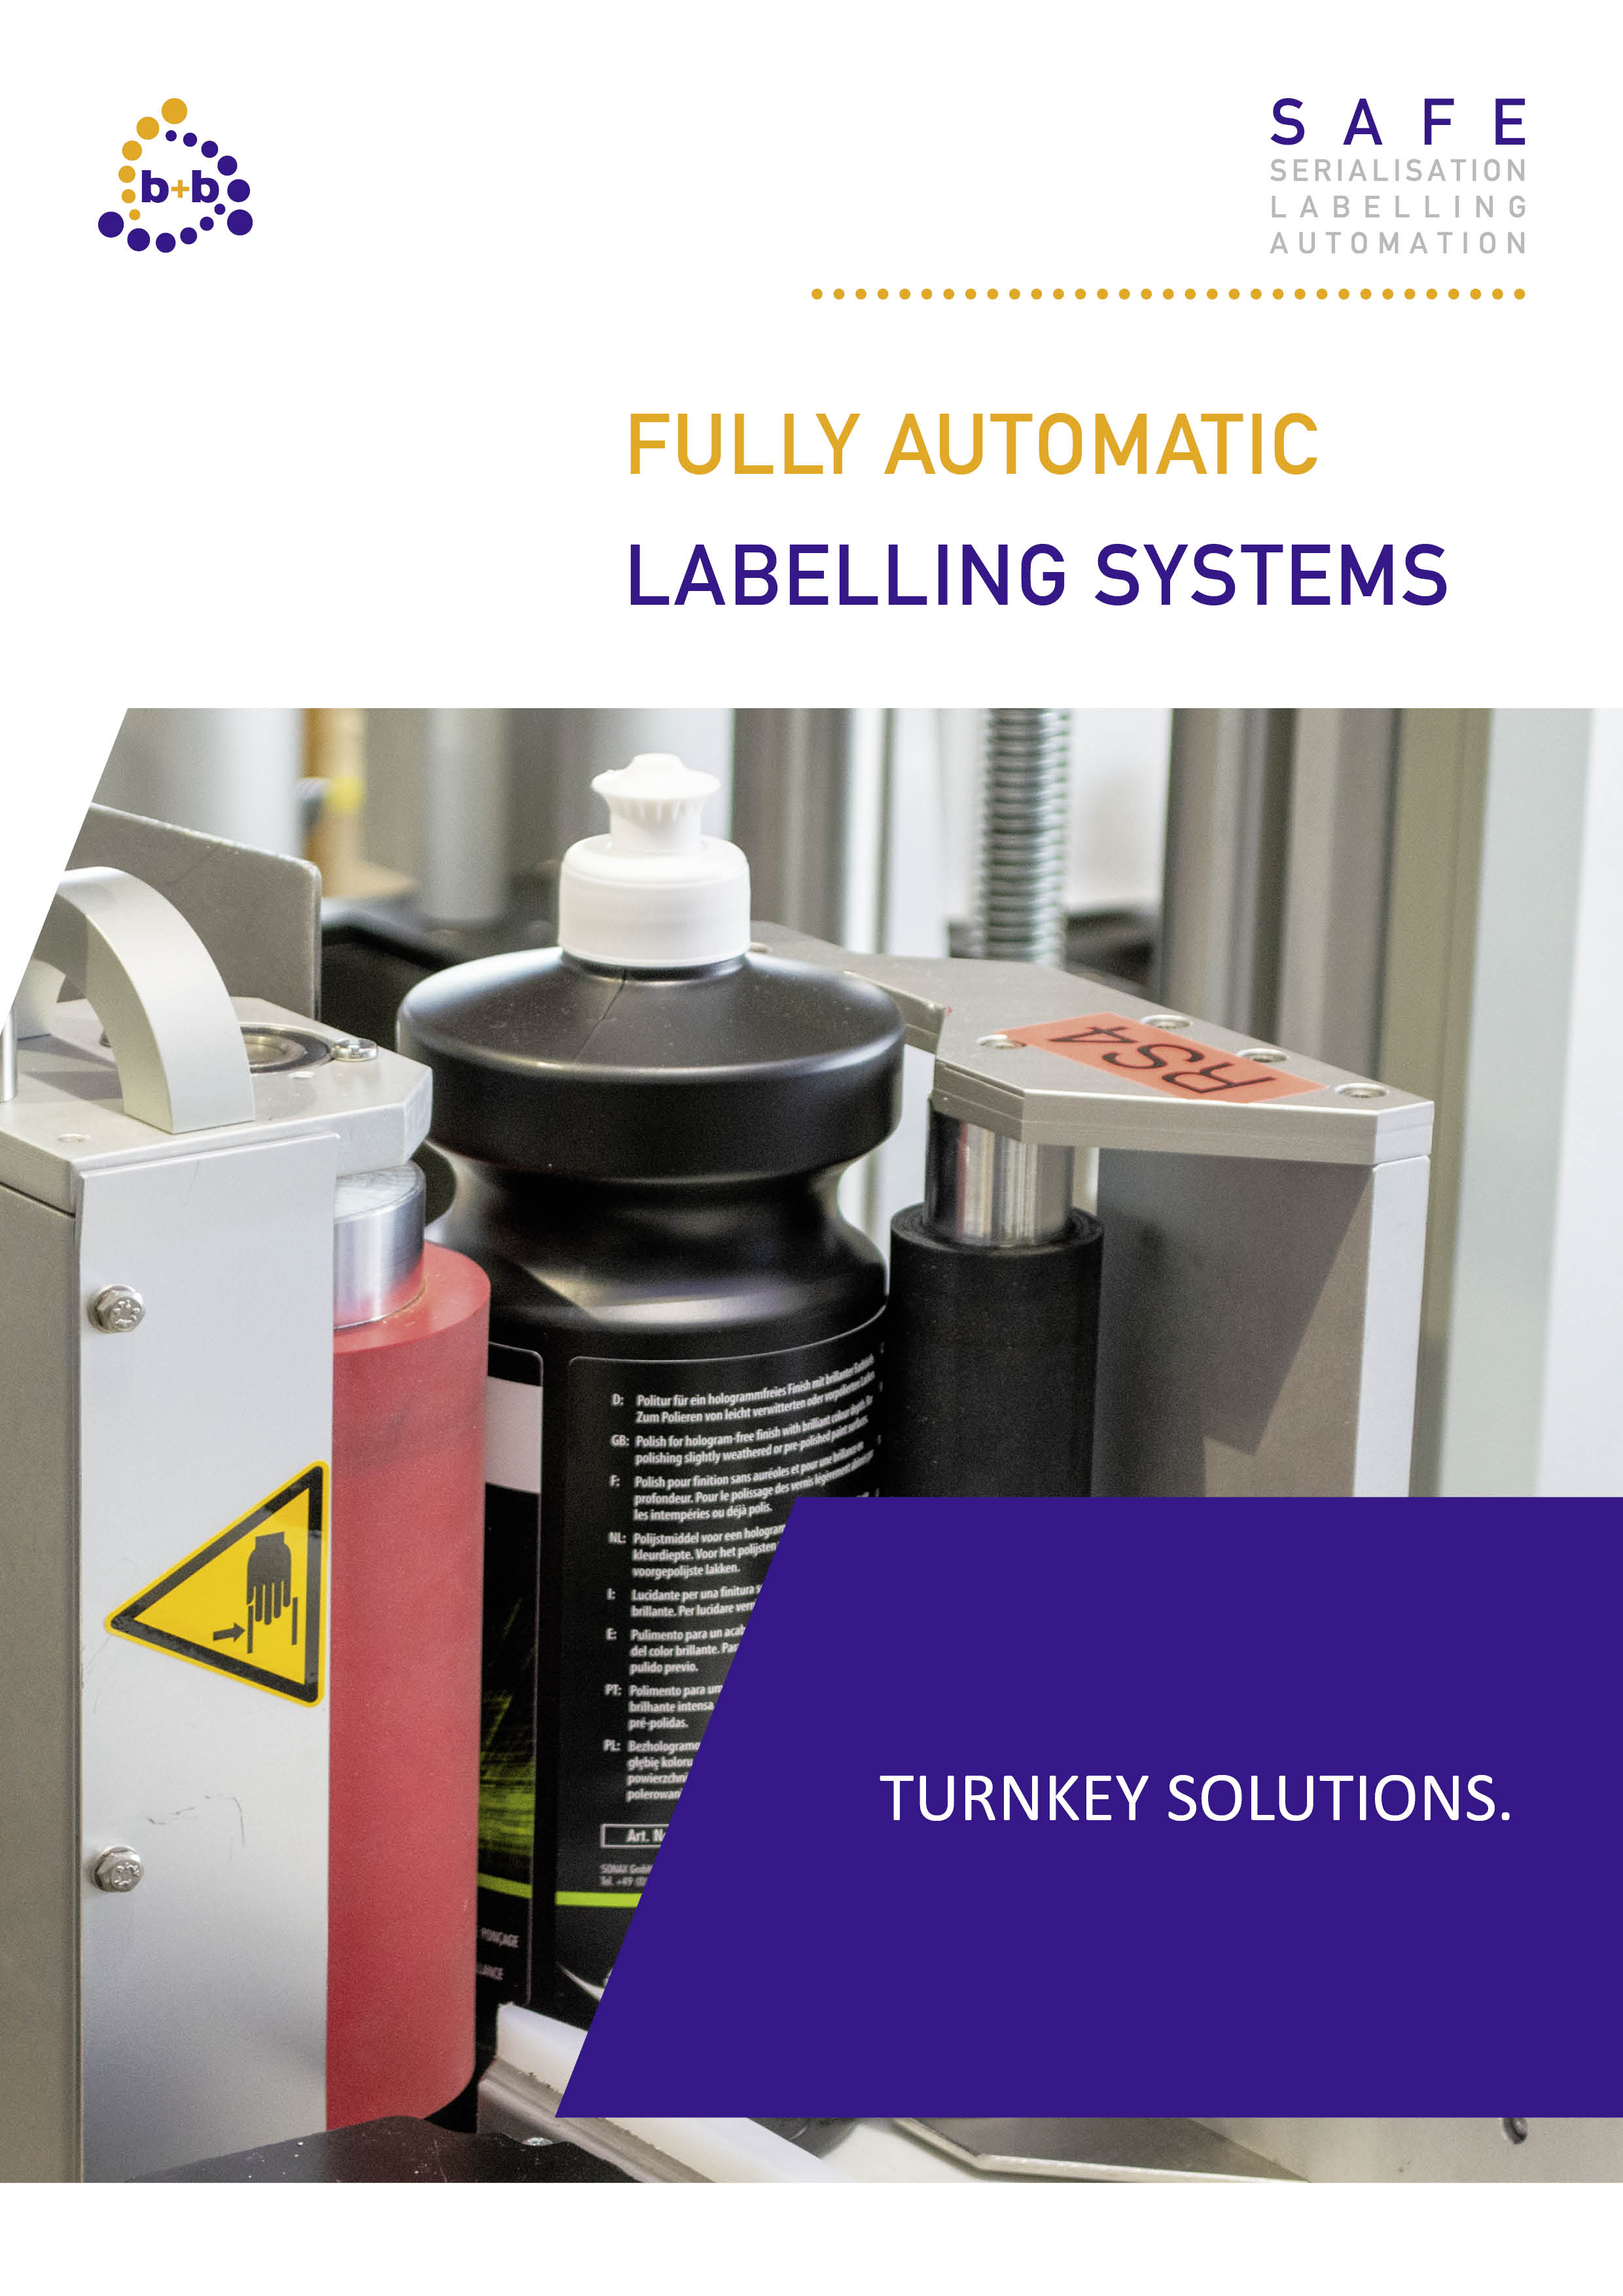 Fully automatic labelling systems